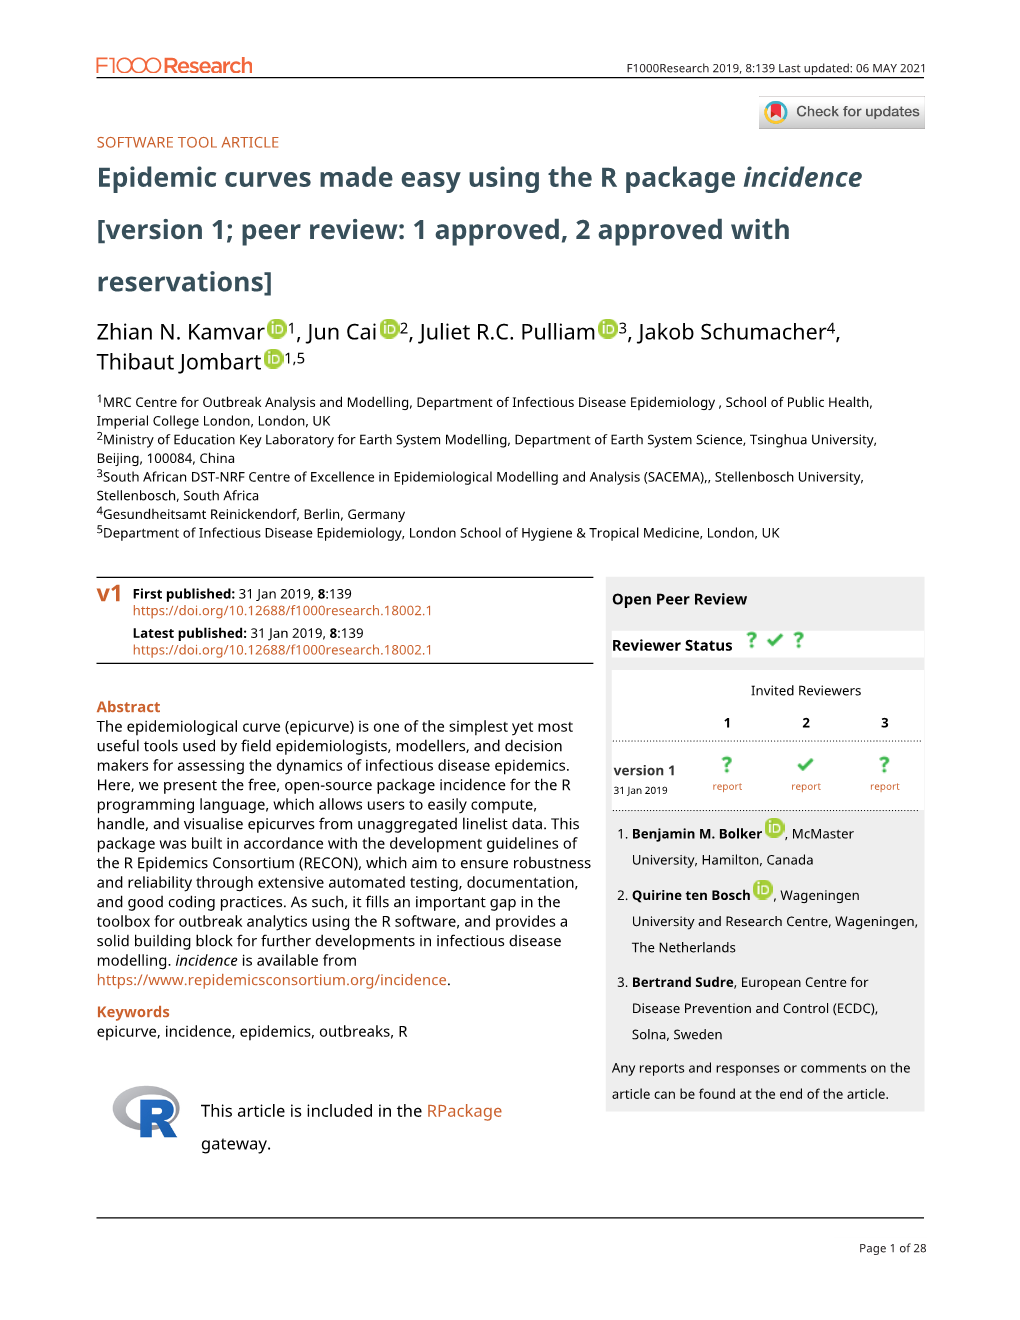 Epidemic Curves Made Easy Using the R Package Incidence [Version 1; Peer Review: 1 Approved, 2 Approved with Reservations]